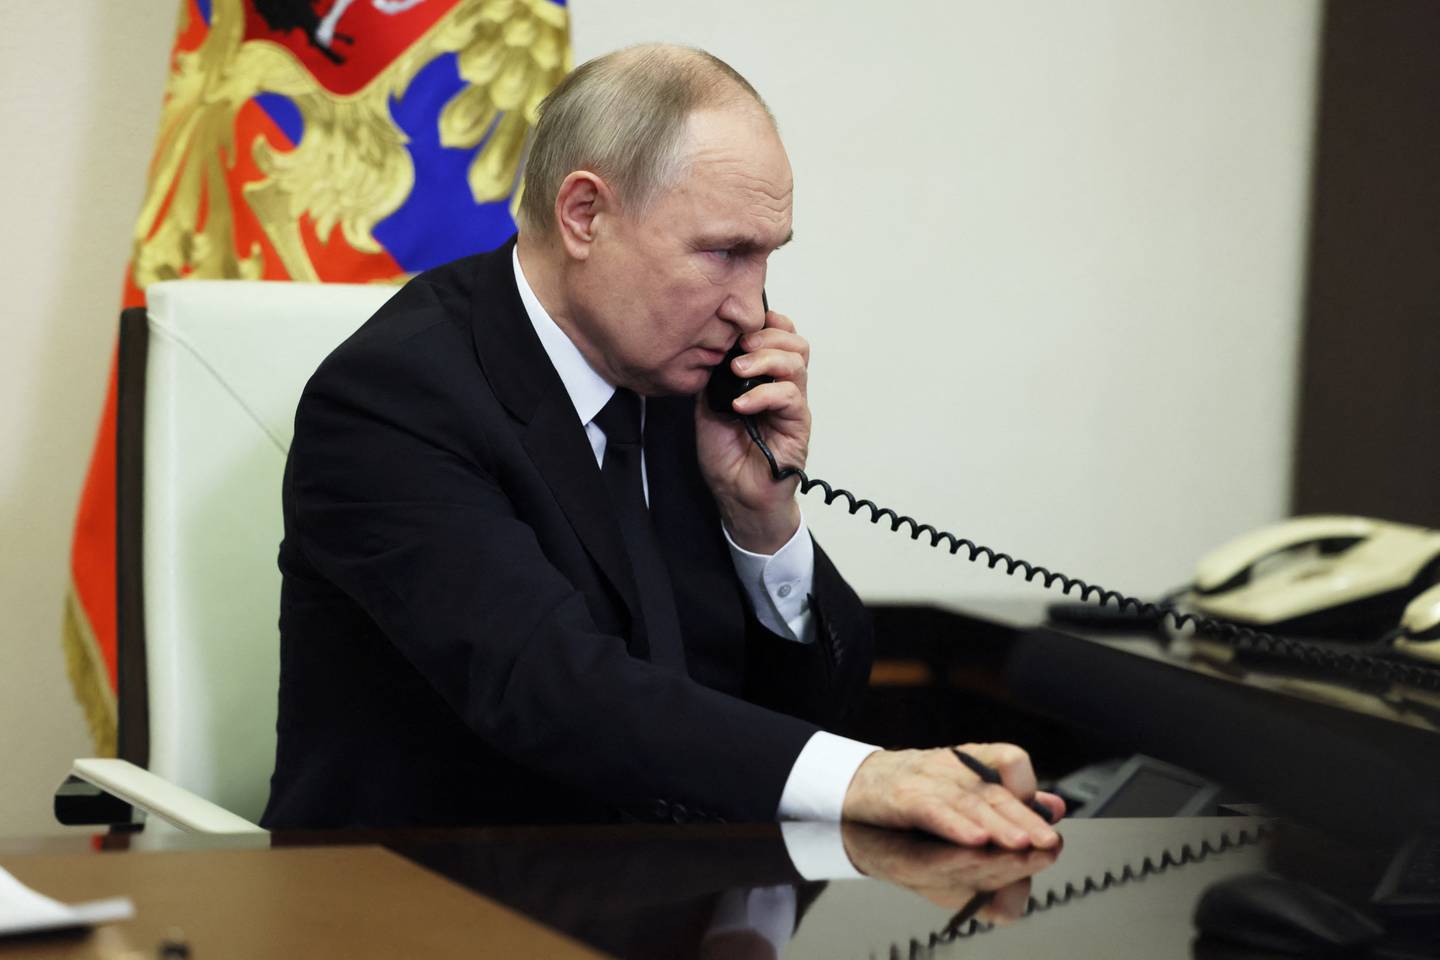 Russian President Vladimir Putin speaks on the phone as he delivers a video address to the nation following a shooting attack at the Crocus City Hall concert venue, at an unidentified location in Russia, March 23, 2024. Sputnik/Mikhail Metzel/Pool via REUTERS ATTENTION EDITORS - THIS IMAGE WAS PROVIDED BY A THIRD PARTY.